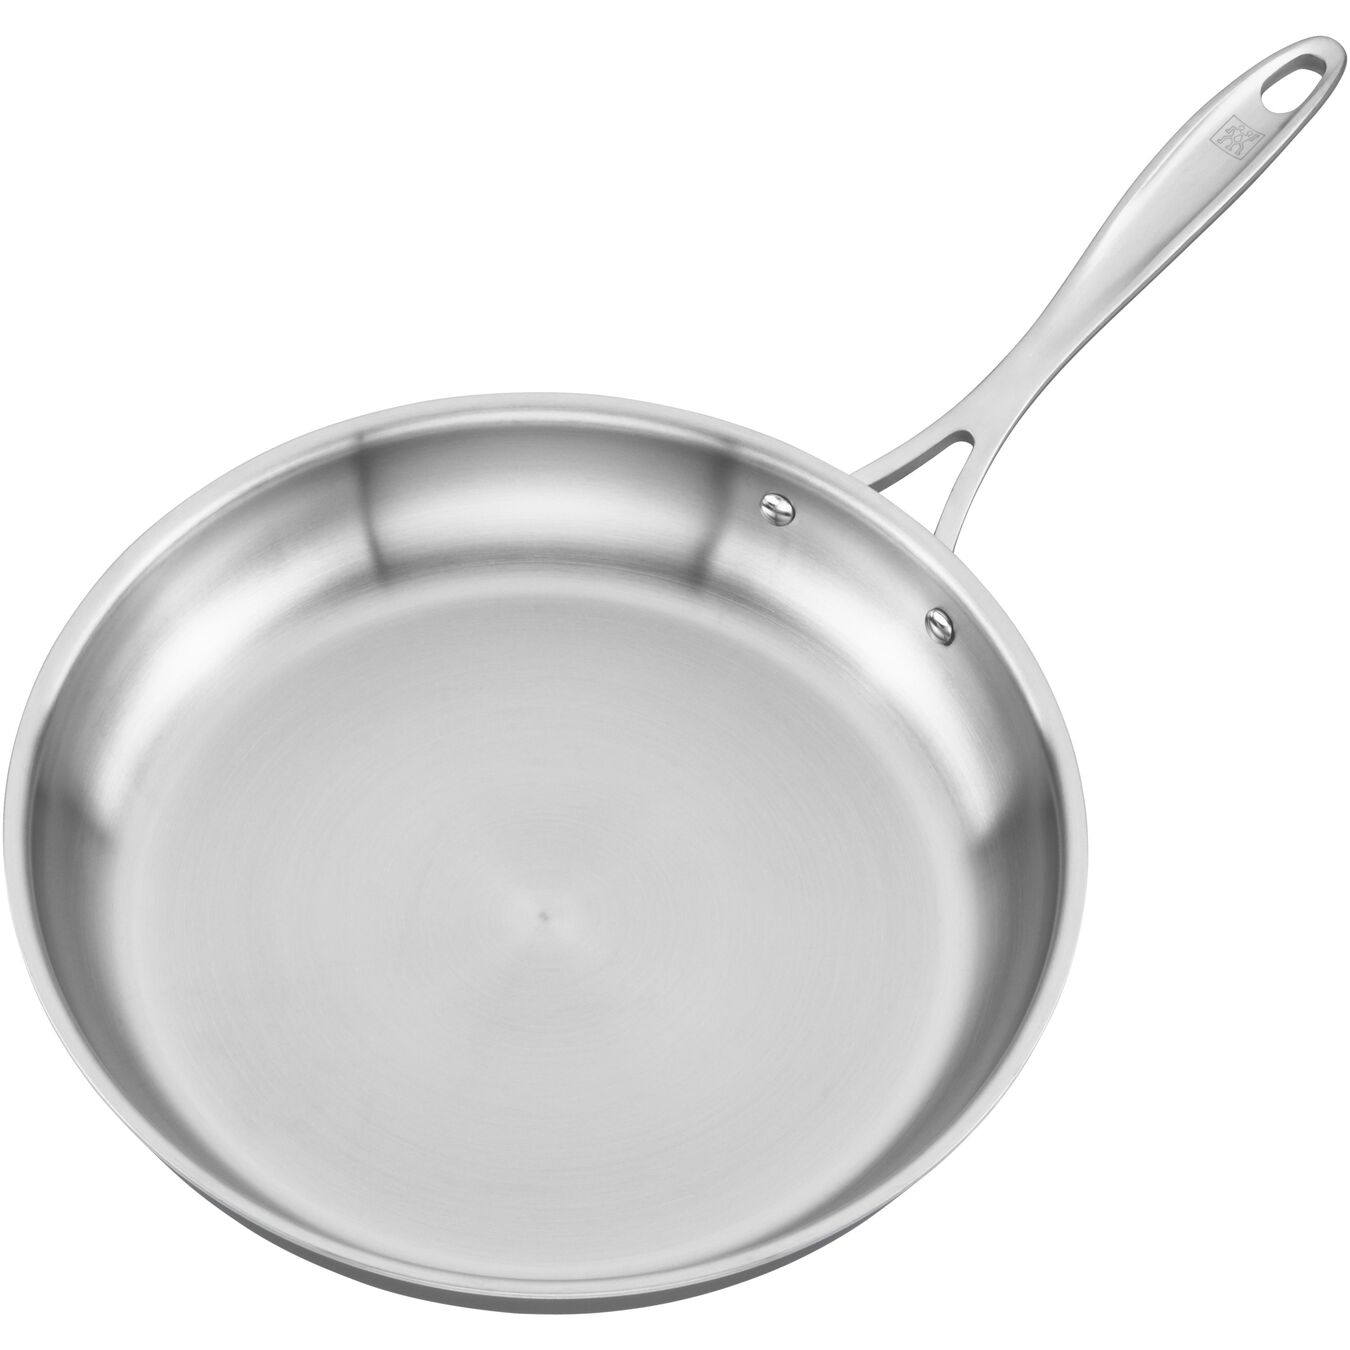 ZWILLING Spirit 3-Ply 12-inch, 18/10 Stainless Steel, Frying pan Zwilling 18/10 Stainless Steel 3 Ply